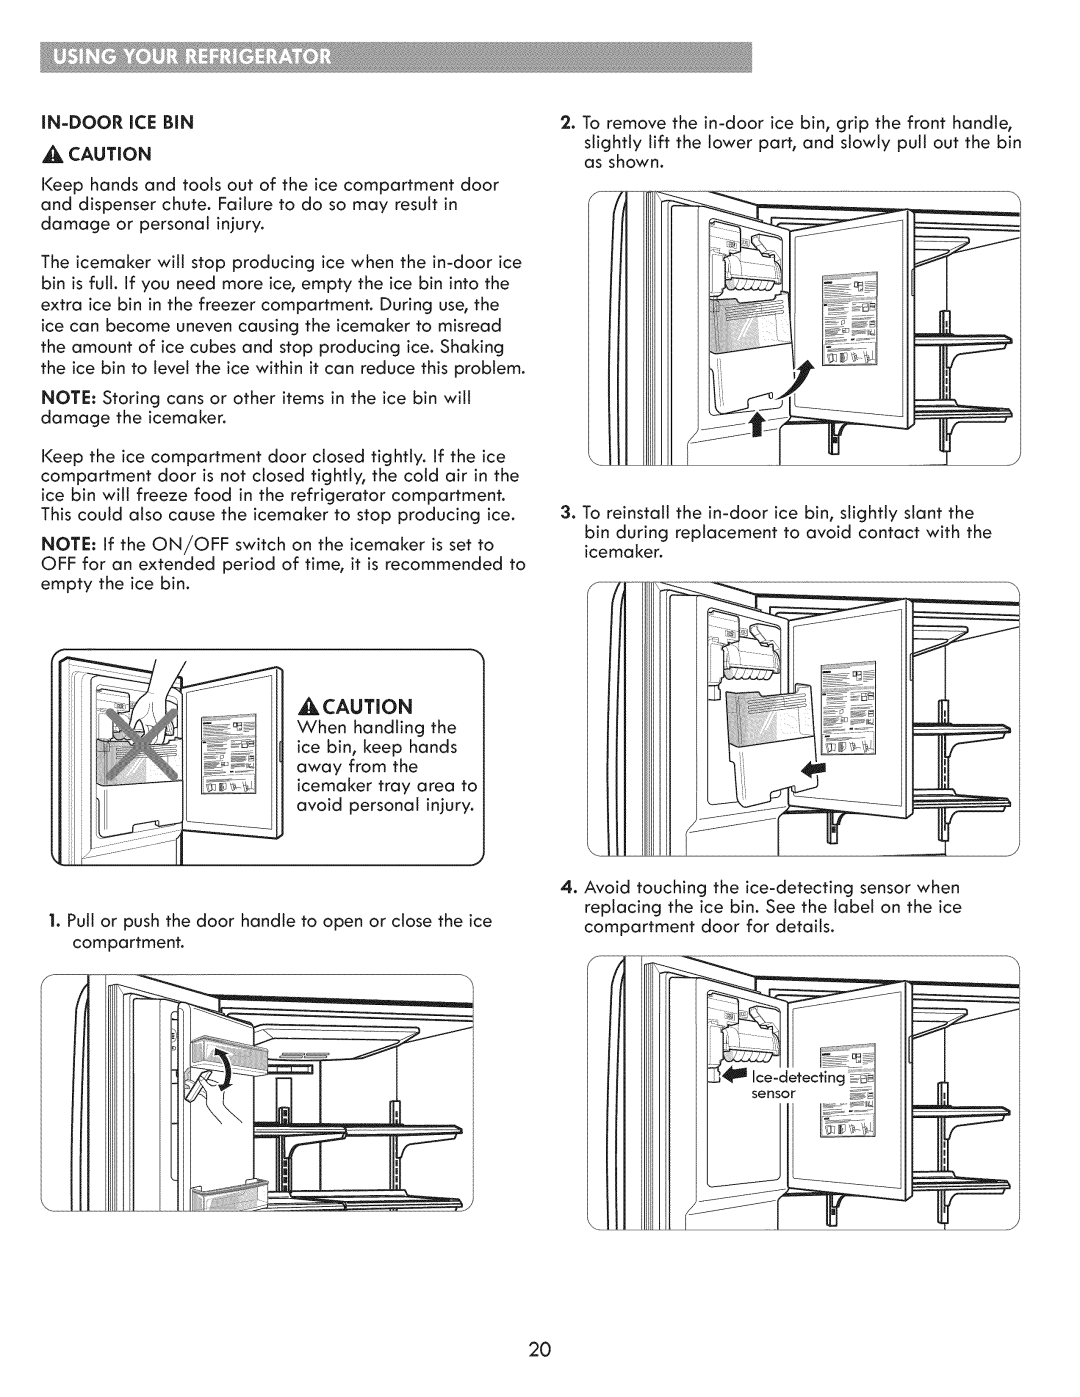 Kenmore 795.7205 manual A. Caution 